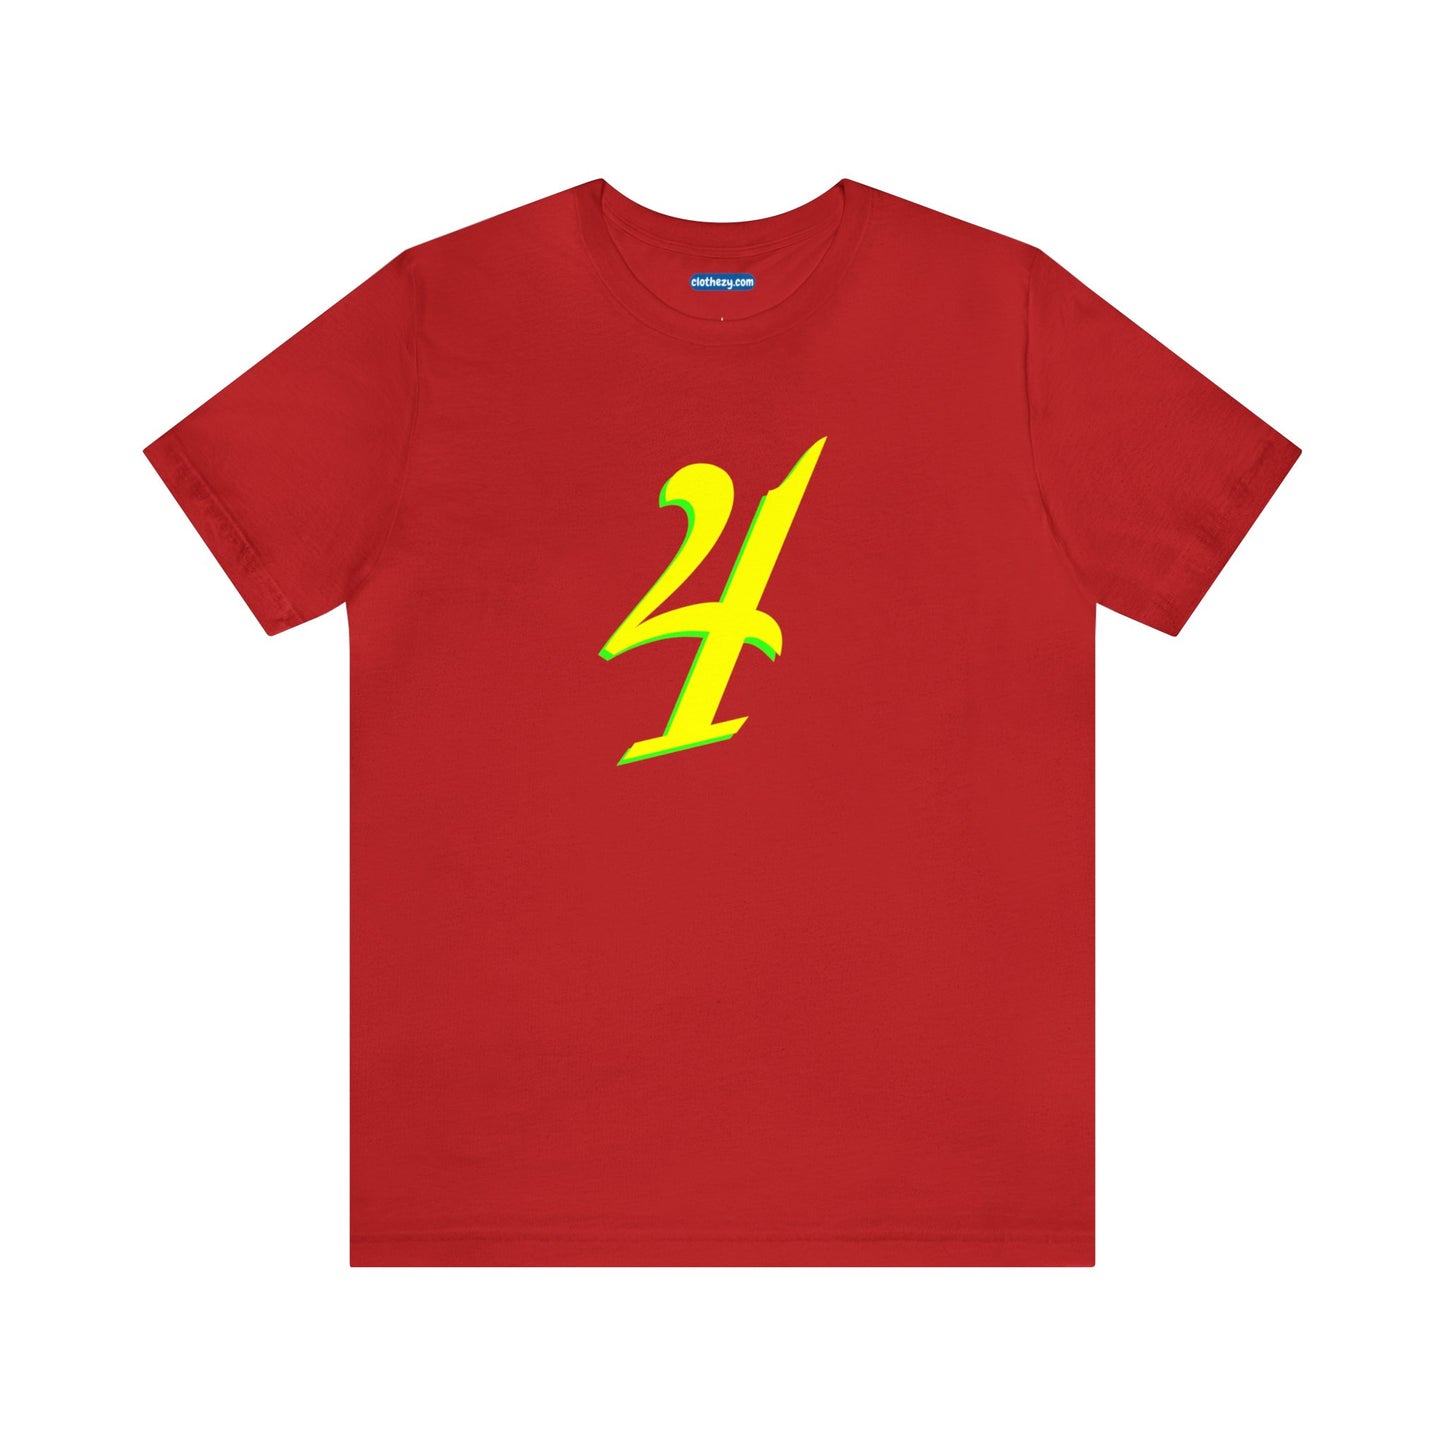 Number 4 Design - Soft Cotton Tee for birthdays and celebrations, Gift for friends and family, Multiple Options by clothezy.com in Red Size Small - Buy Now